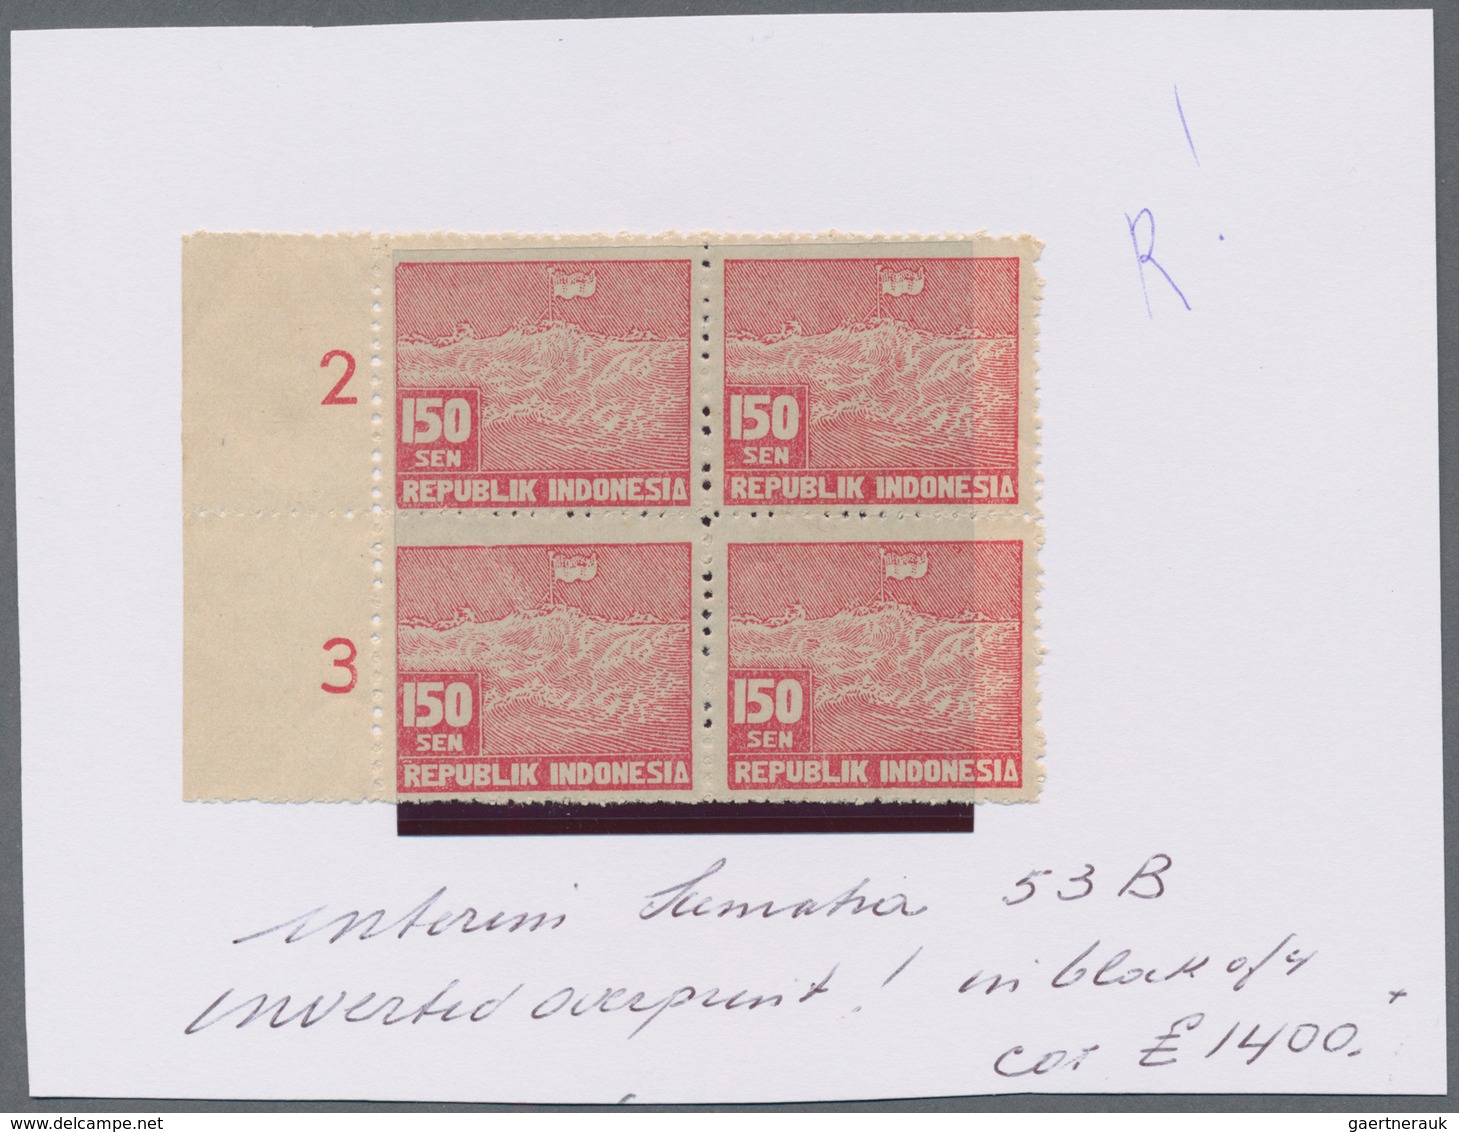 Indonesien - Lokalausgaben: 1945/50, very specialized collection on pages/stock cards in two large s